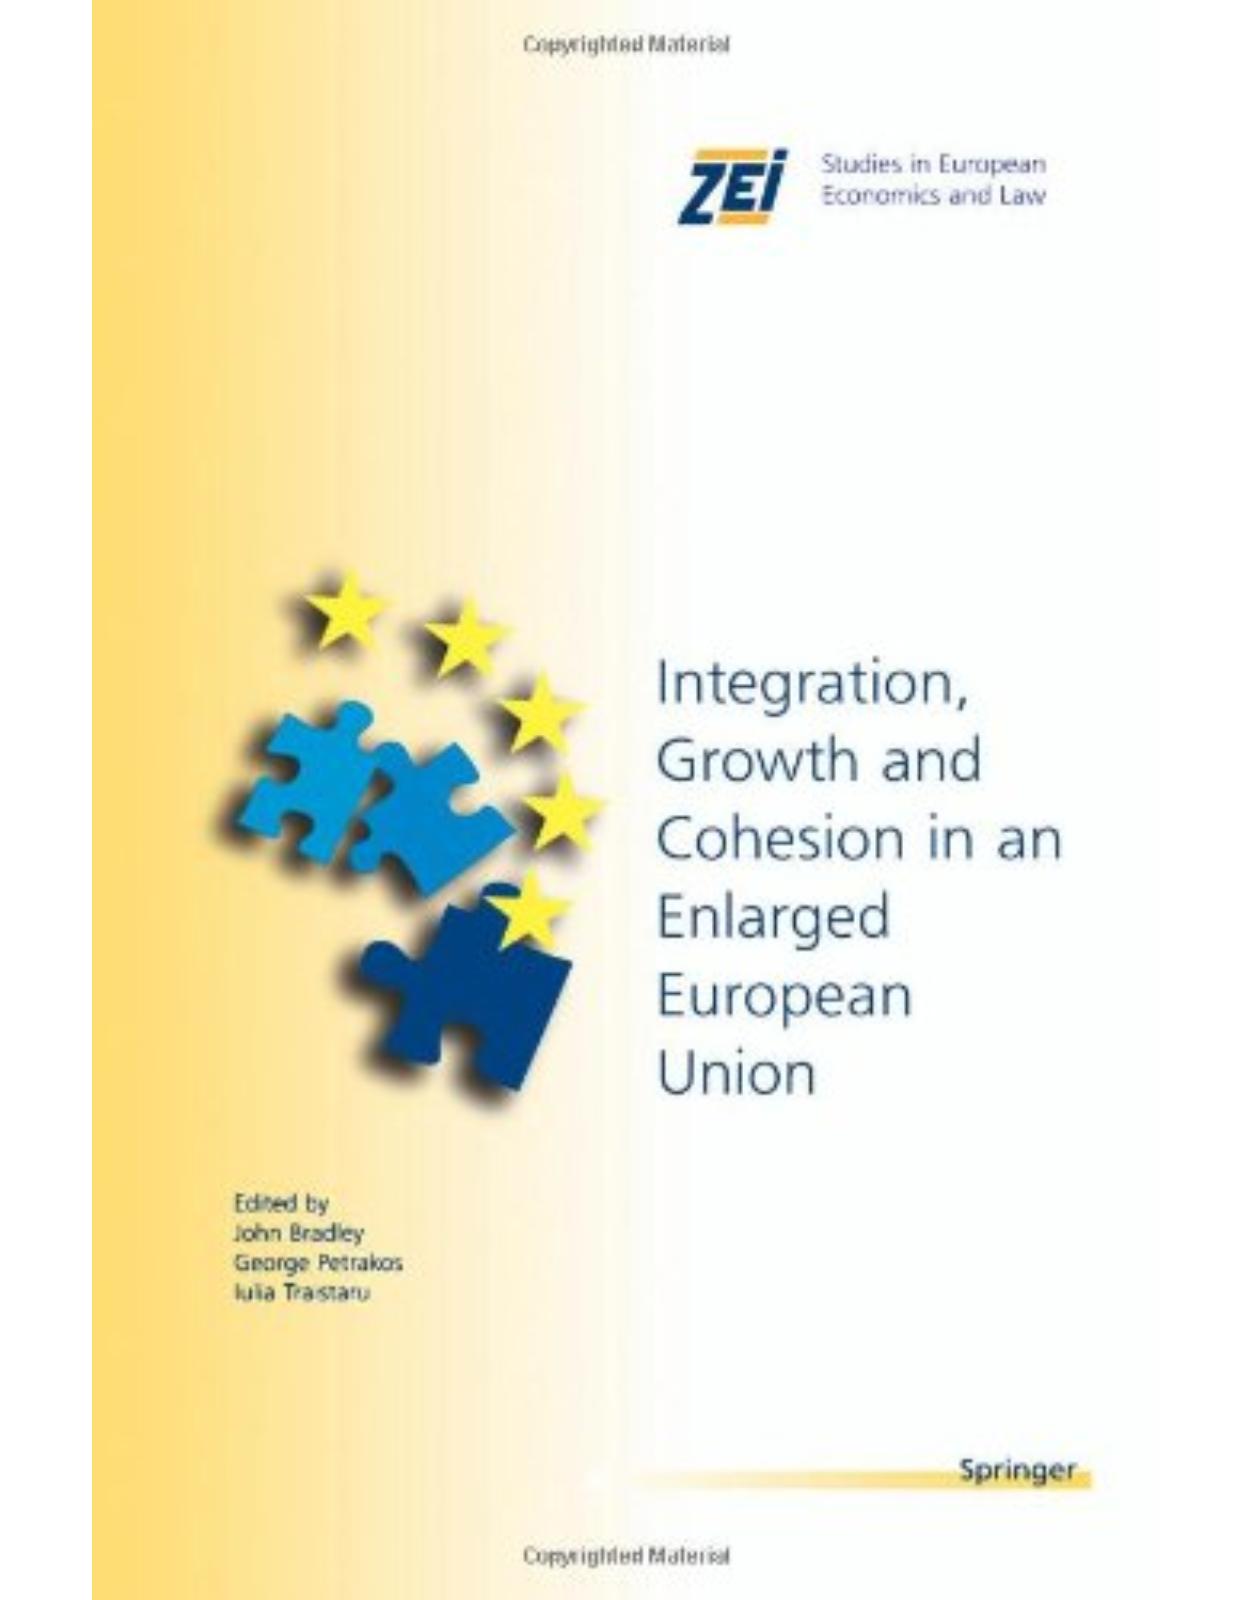 Integration, Growth, and Cohesion in an Enlarged European Union (ZEI Studies in European Economics and Law) 